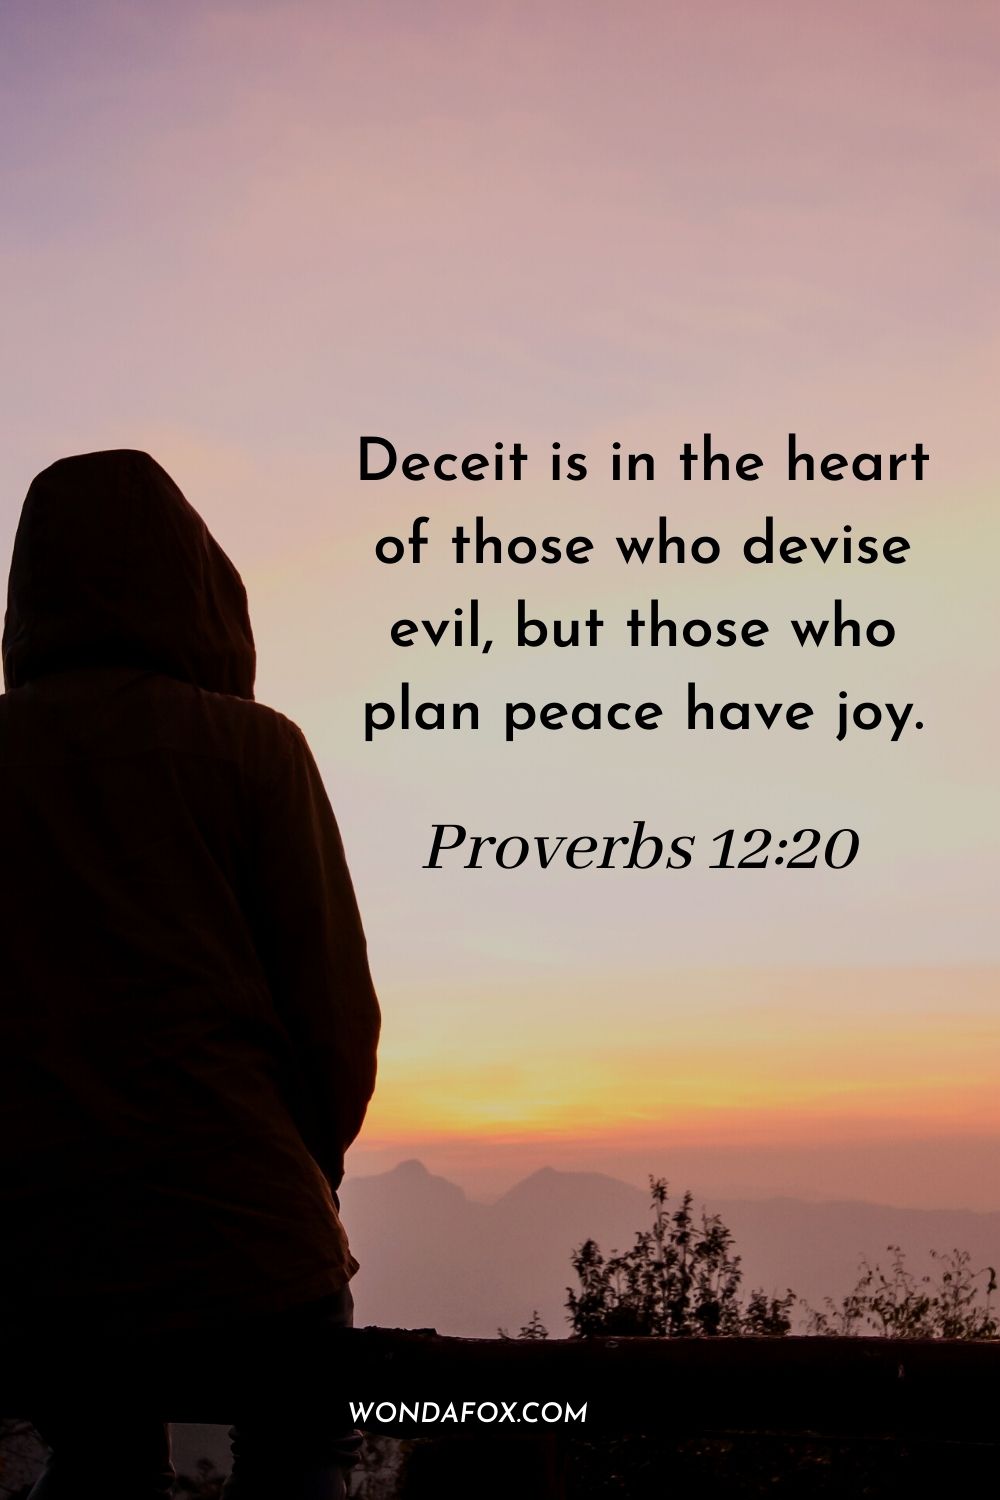 Deceit is in the heart of those who devise evil, but those who plan peace have joy. Proverbs 12:20